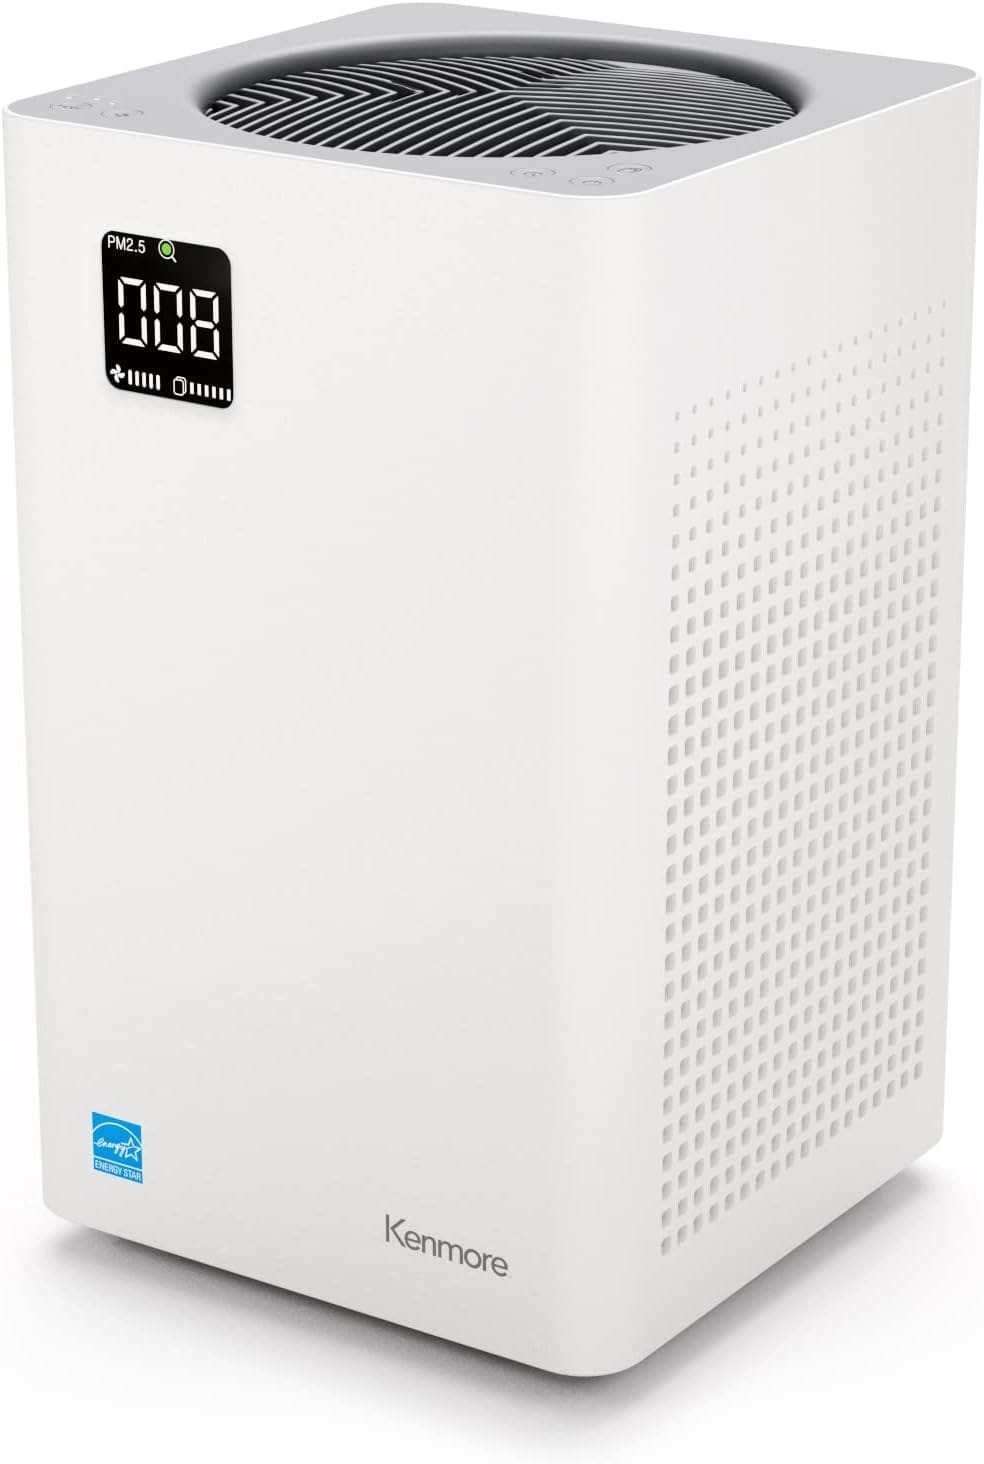 Kenmore PM2010 Air Purifier Review